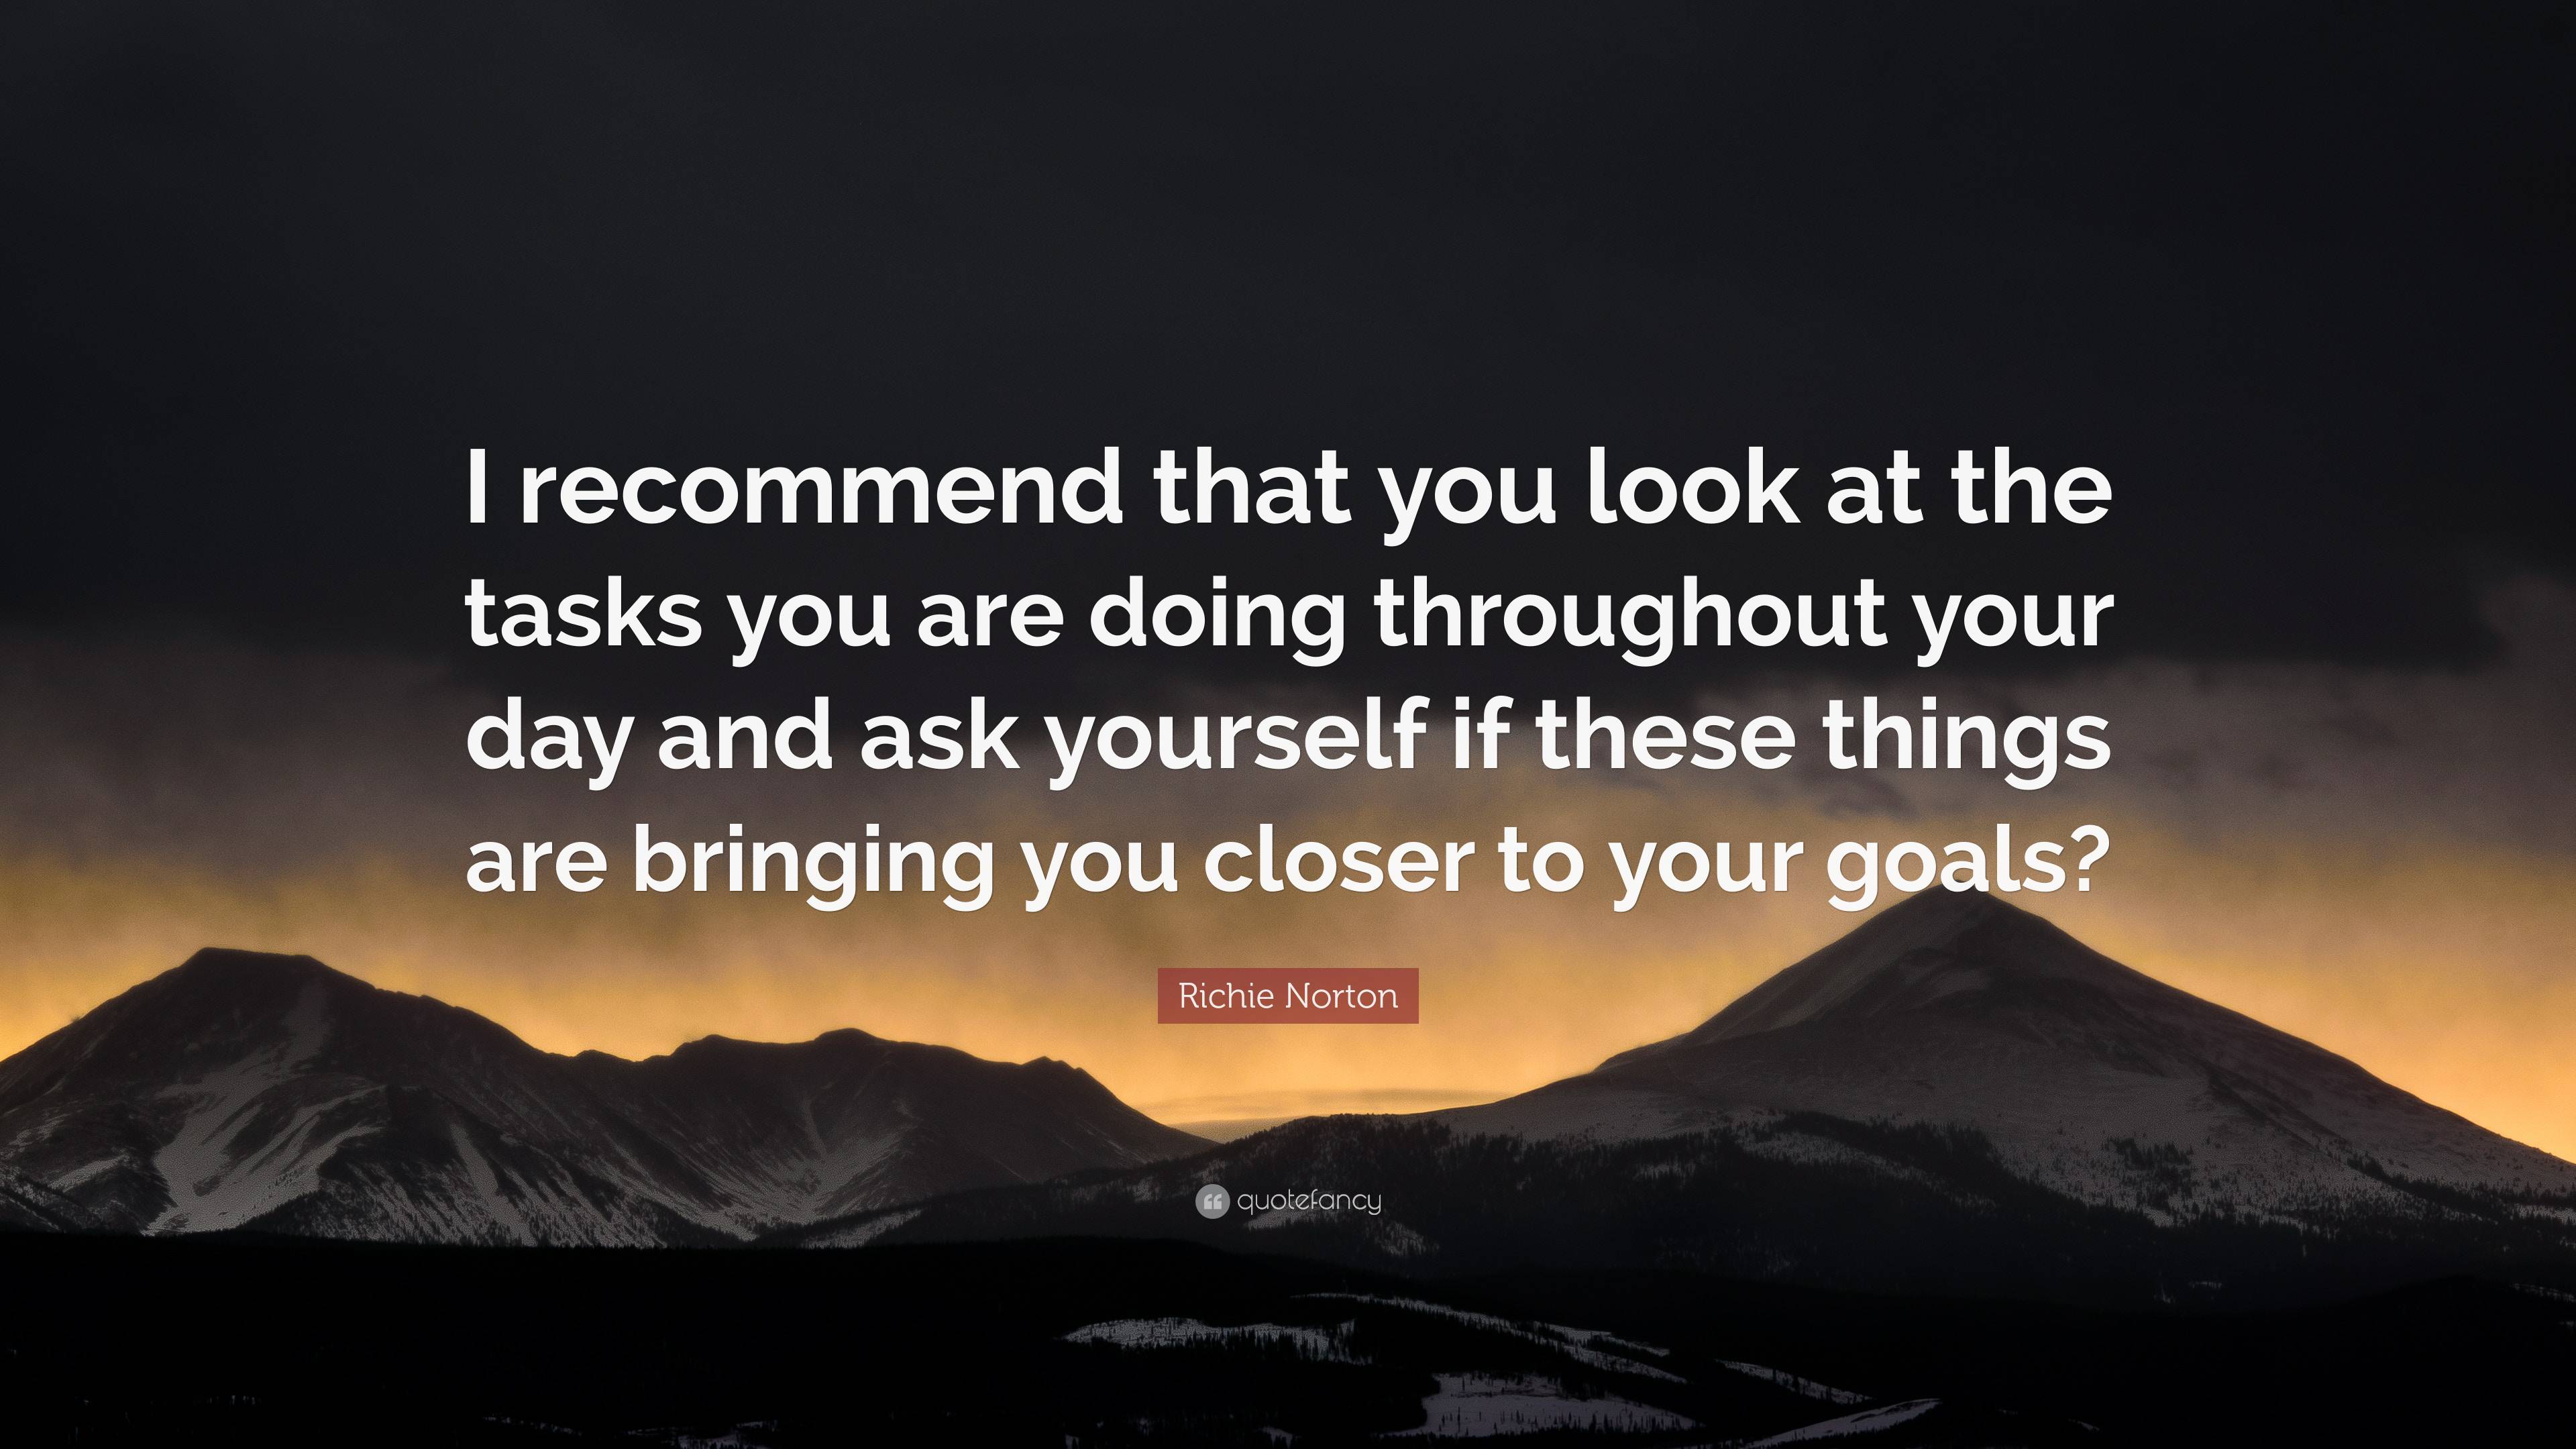 Richie Norton Quote: “I recommend that you look at the tasks you are ...